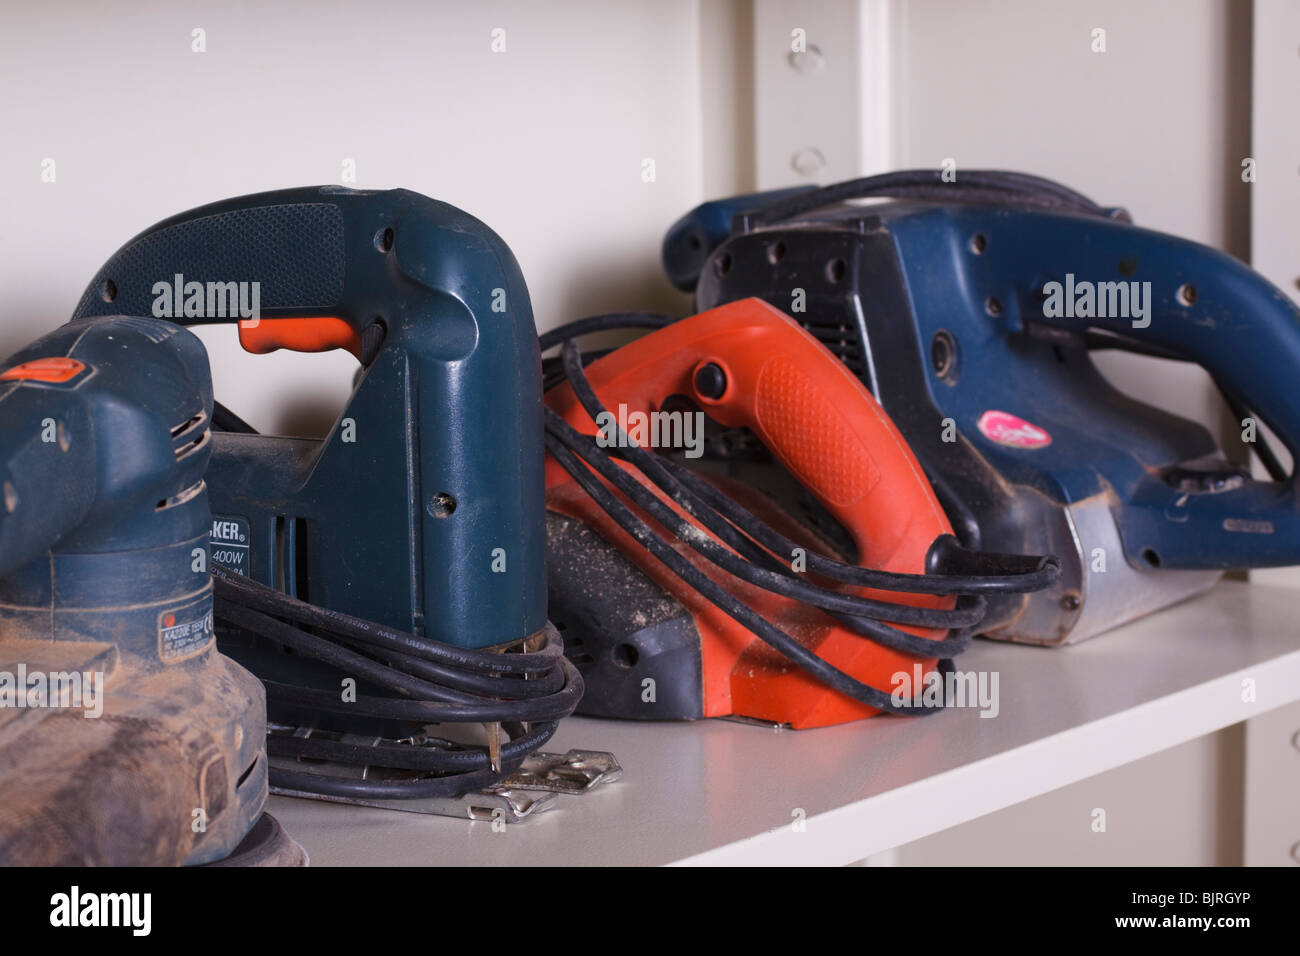 Various potable power tools line the shelves of a cupboard in a workshop. Stock Photo